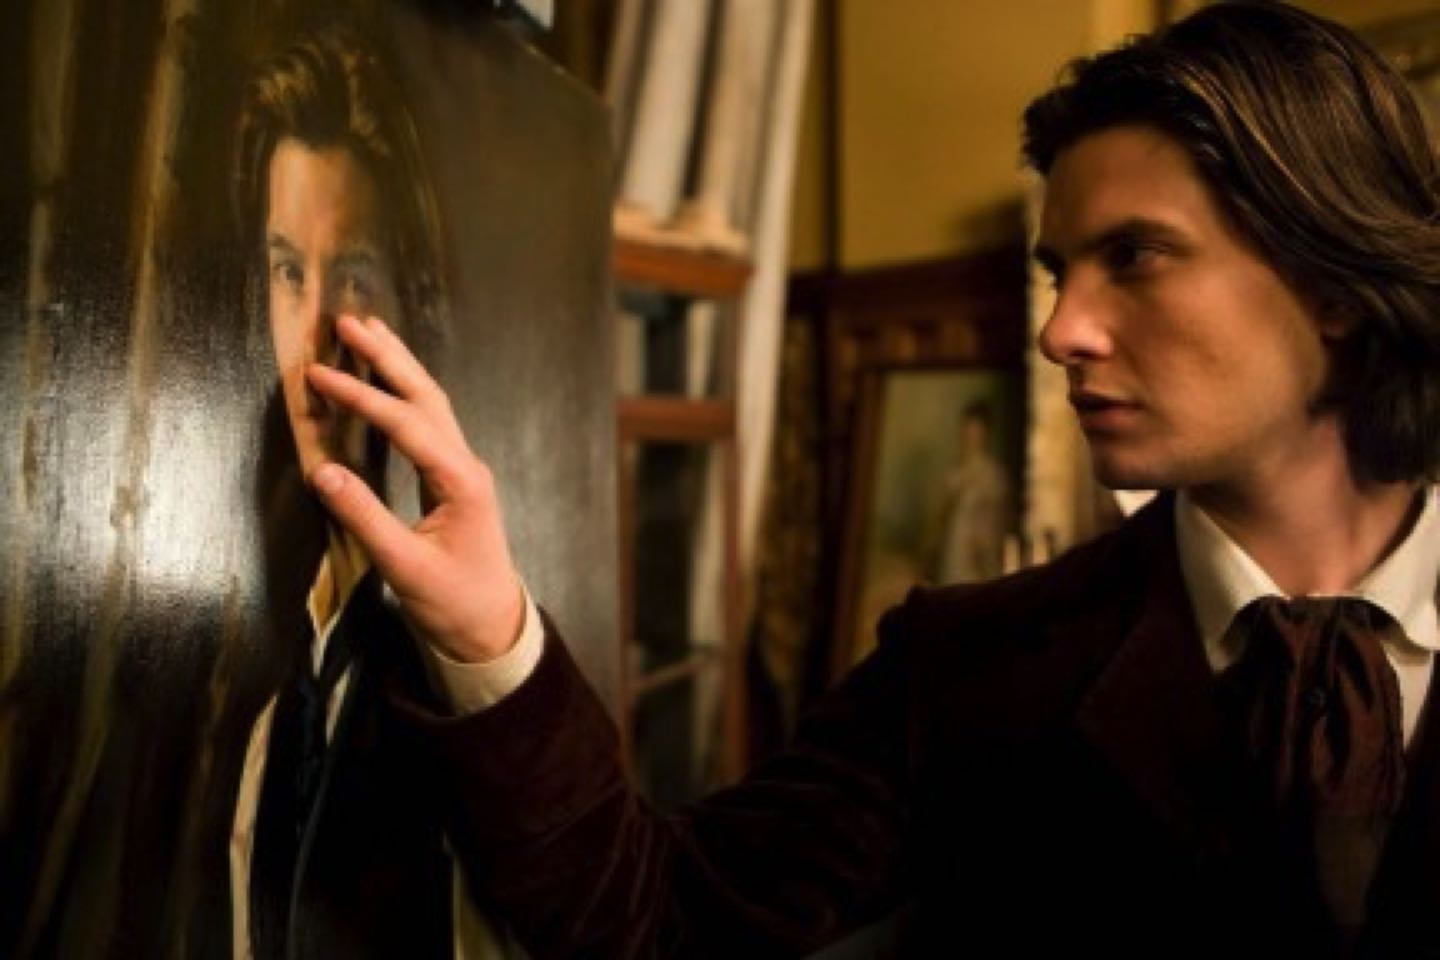 Dorian Gray could'nt enjoy the benefits of antiaging medicine